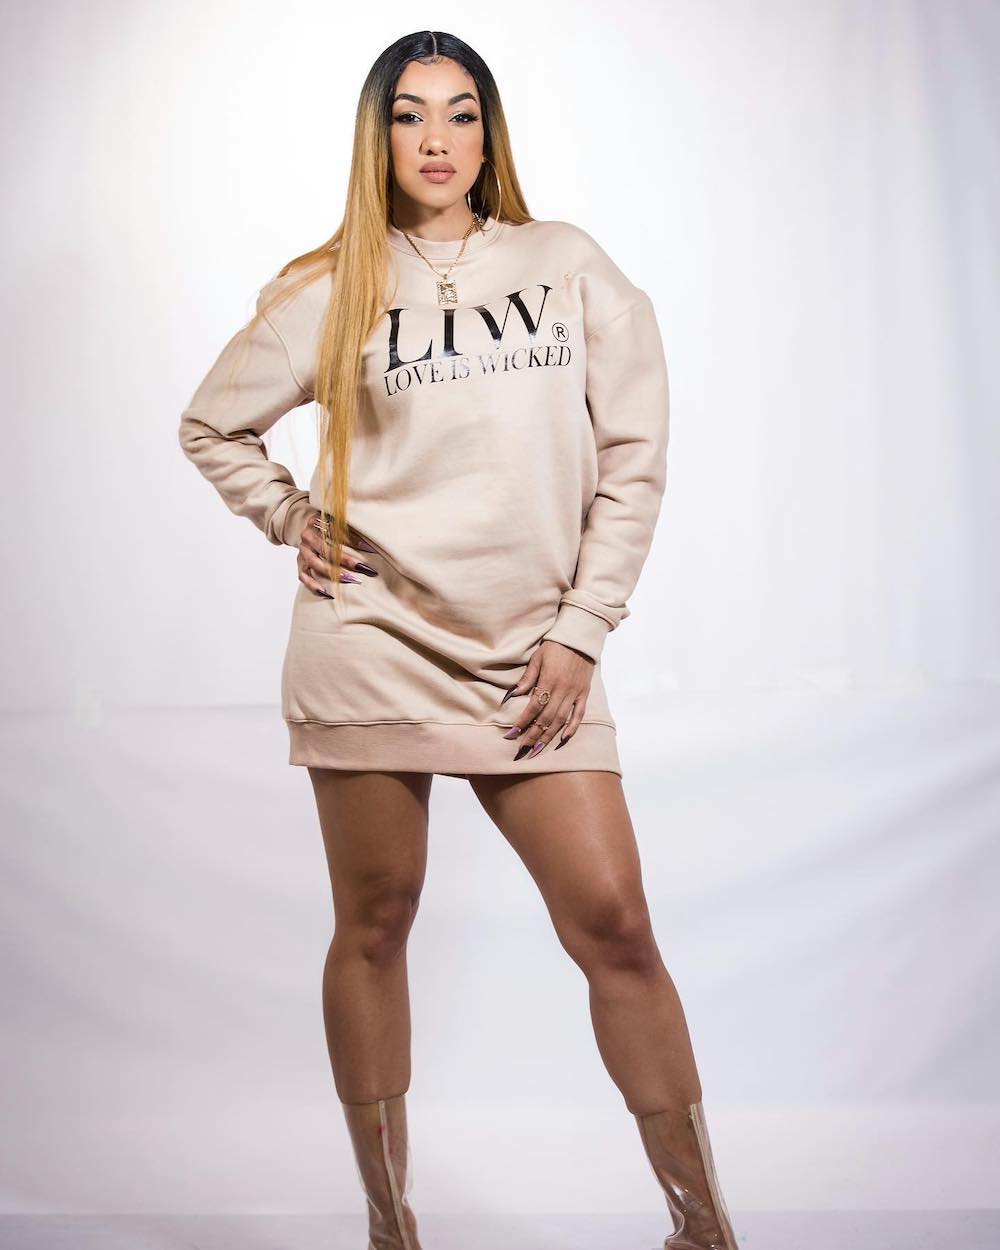 Nyanda Thorbourne Sports 'Love Is Wicked' Sweater Dress